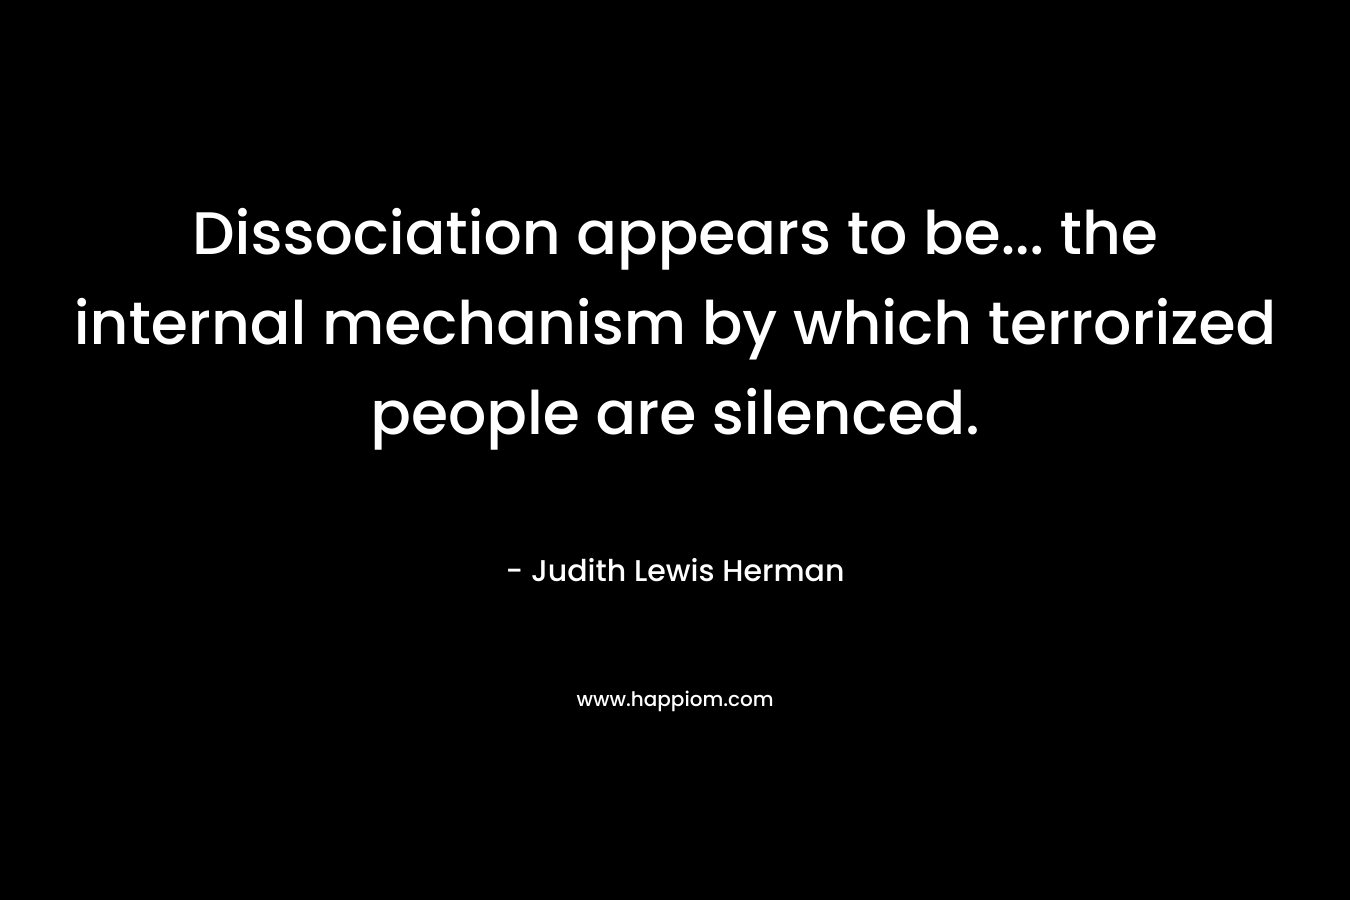 Dissociation appears to be... the internal mechanism by which terrorized people are silenced.